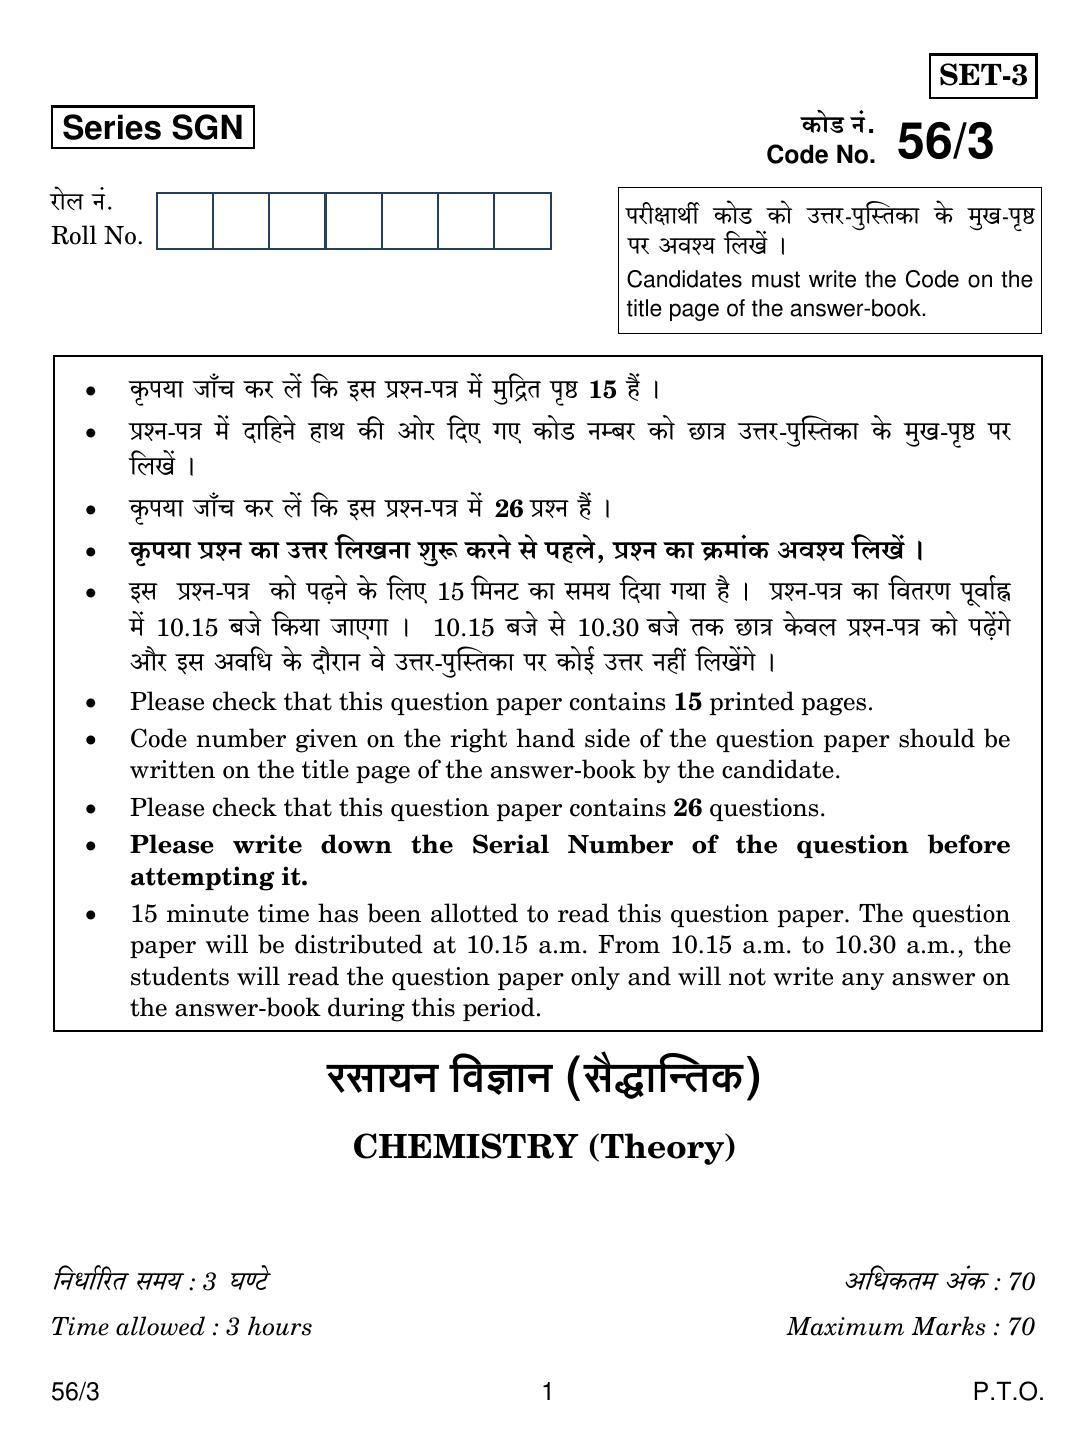 CBSE Class 12 56-3 CHEMISTRY 2018 Question Paper - Page 1